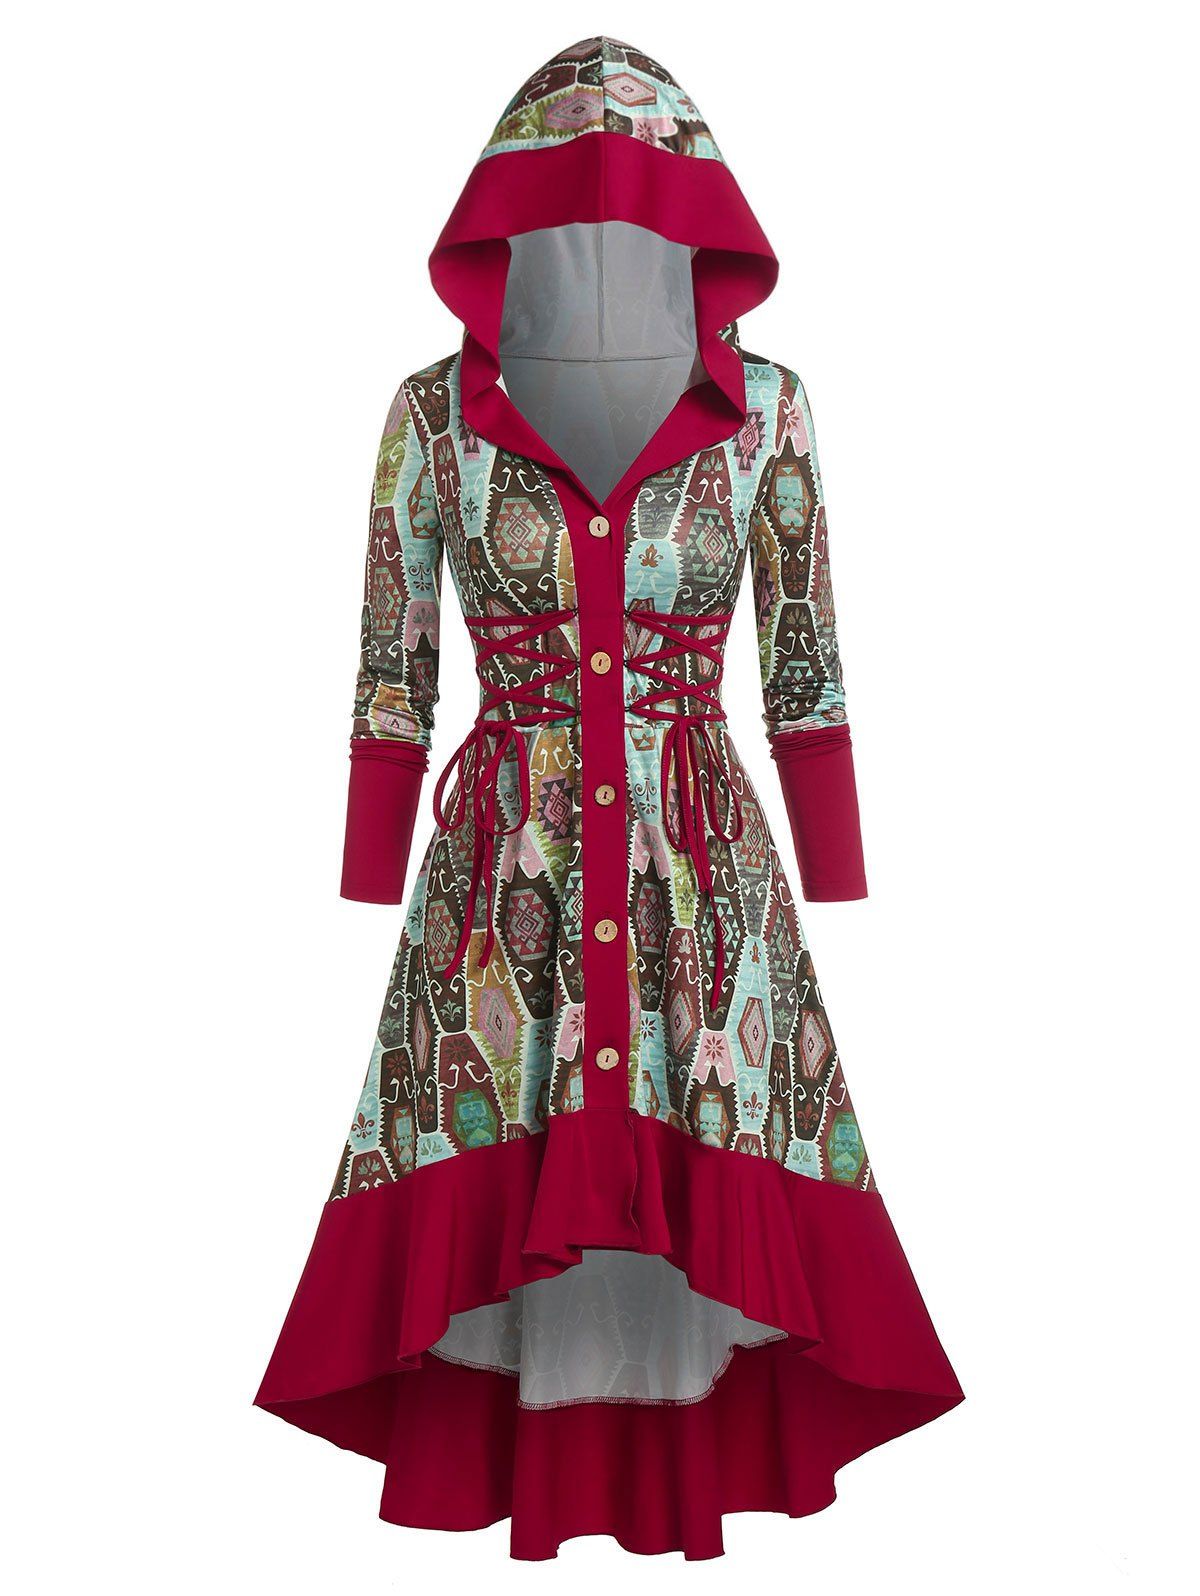 Hooded Print Lace Up High Low Midi Dress - DEEP RED XL